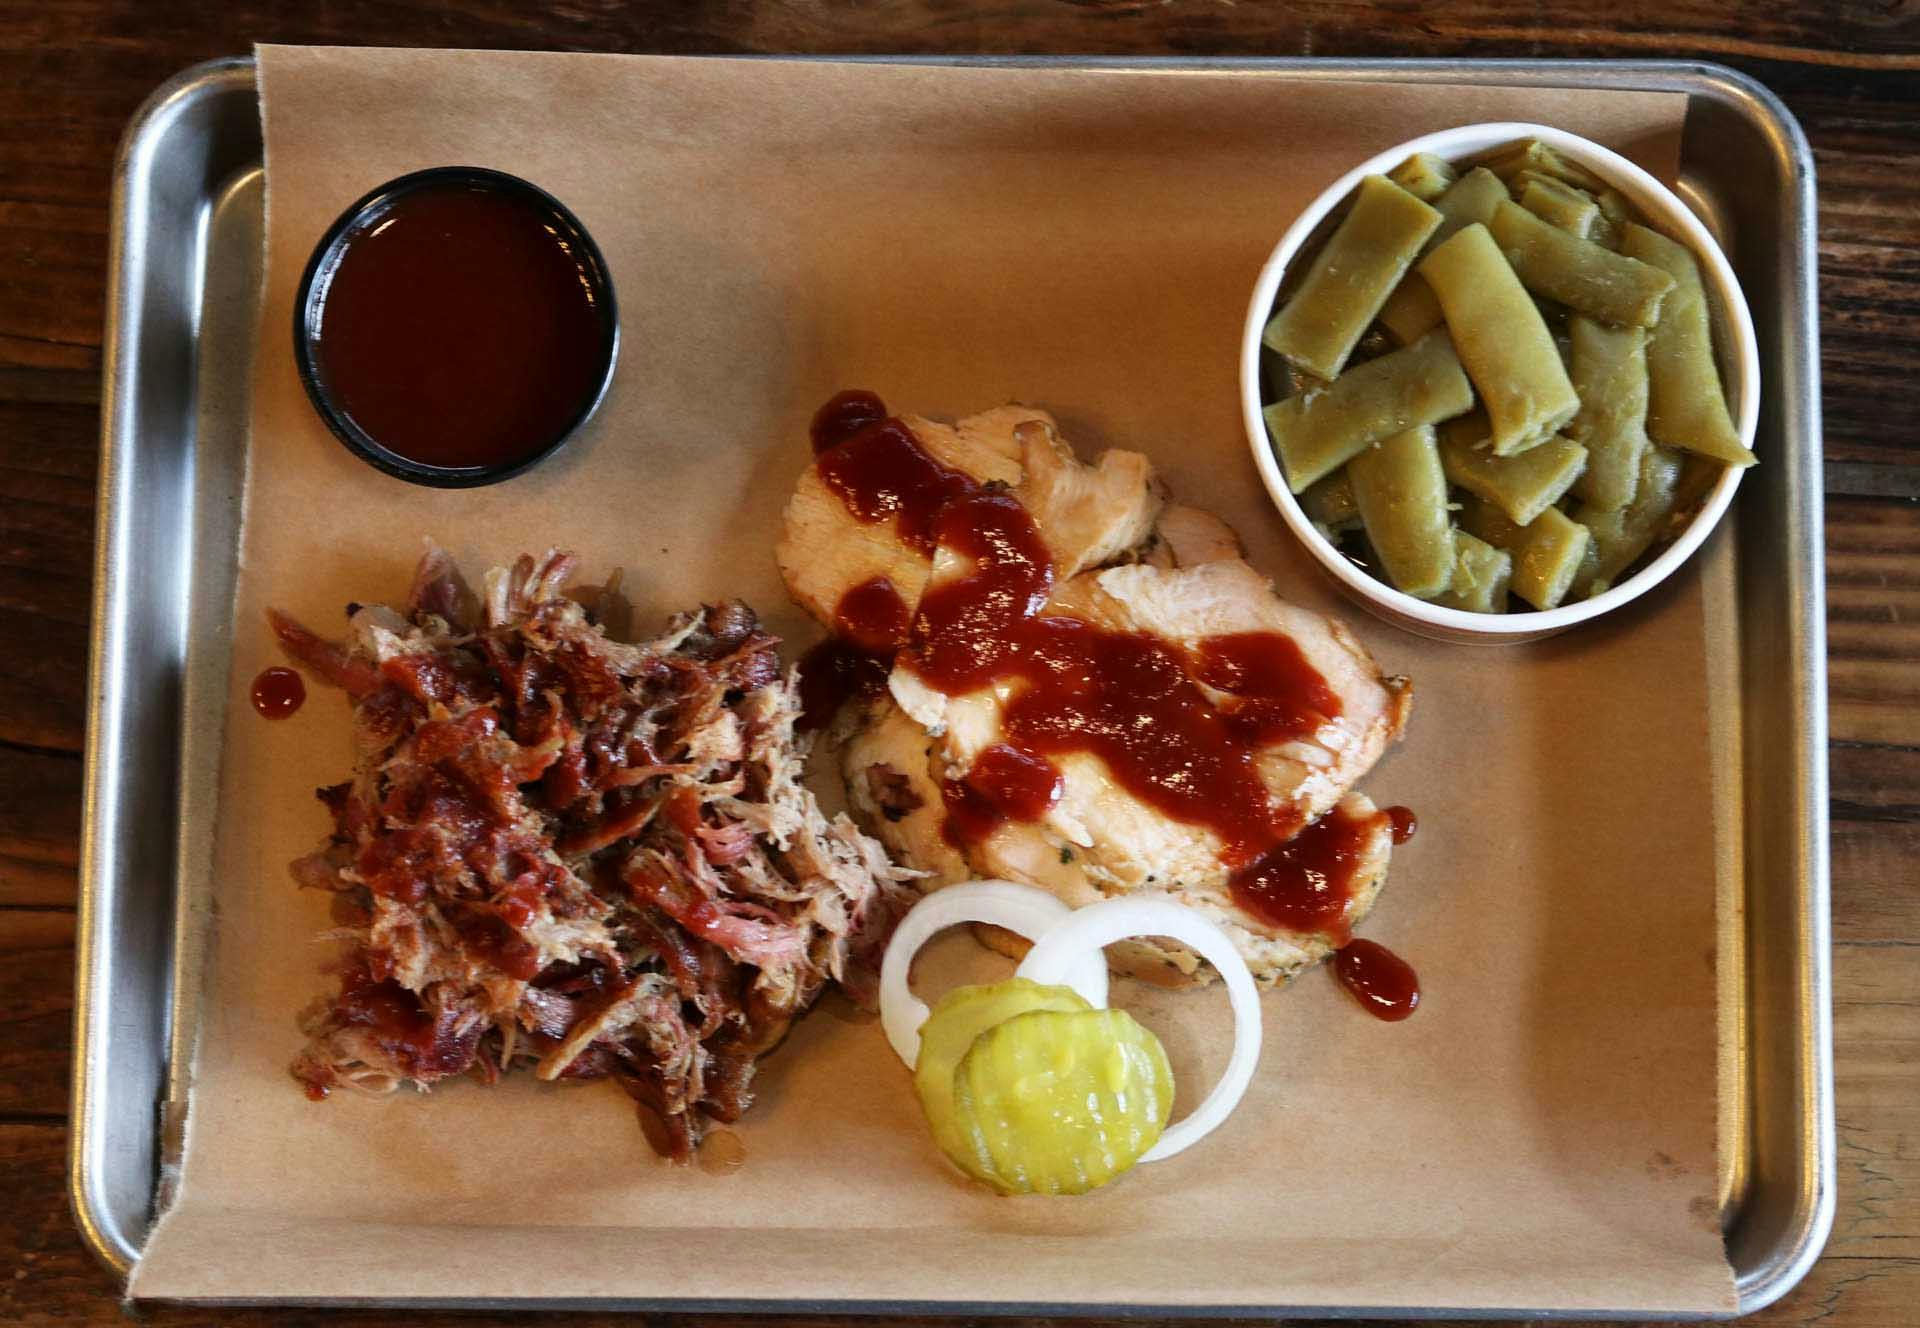 One lucky Hillsboro resident will receive $500 gift card at Dickey's Barbecue Pit opening